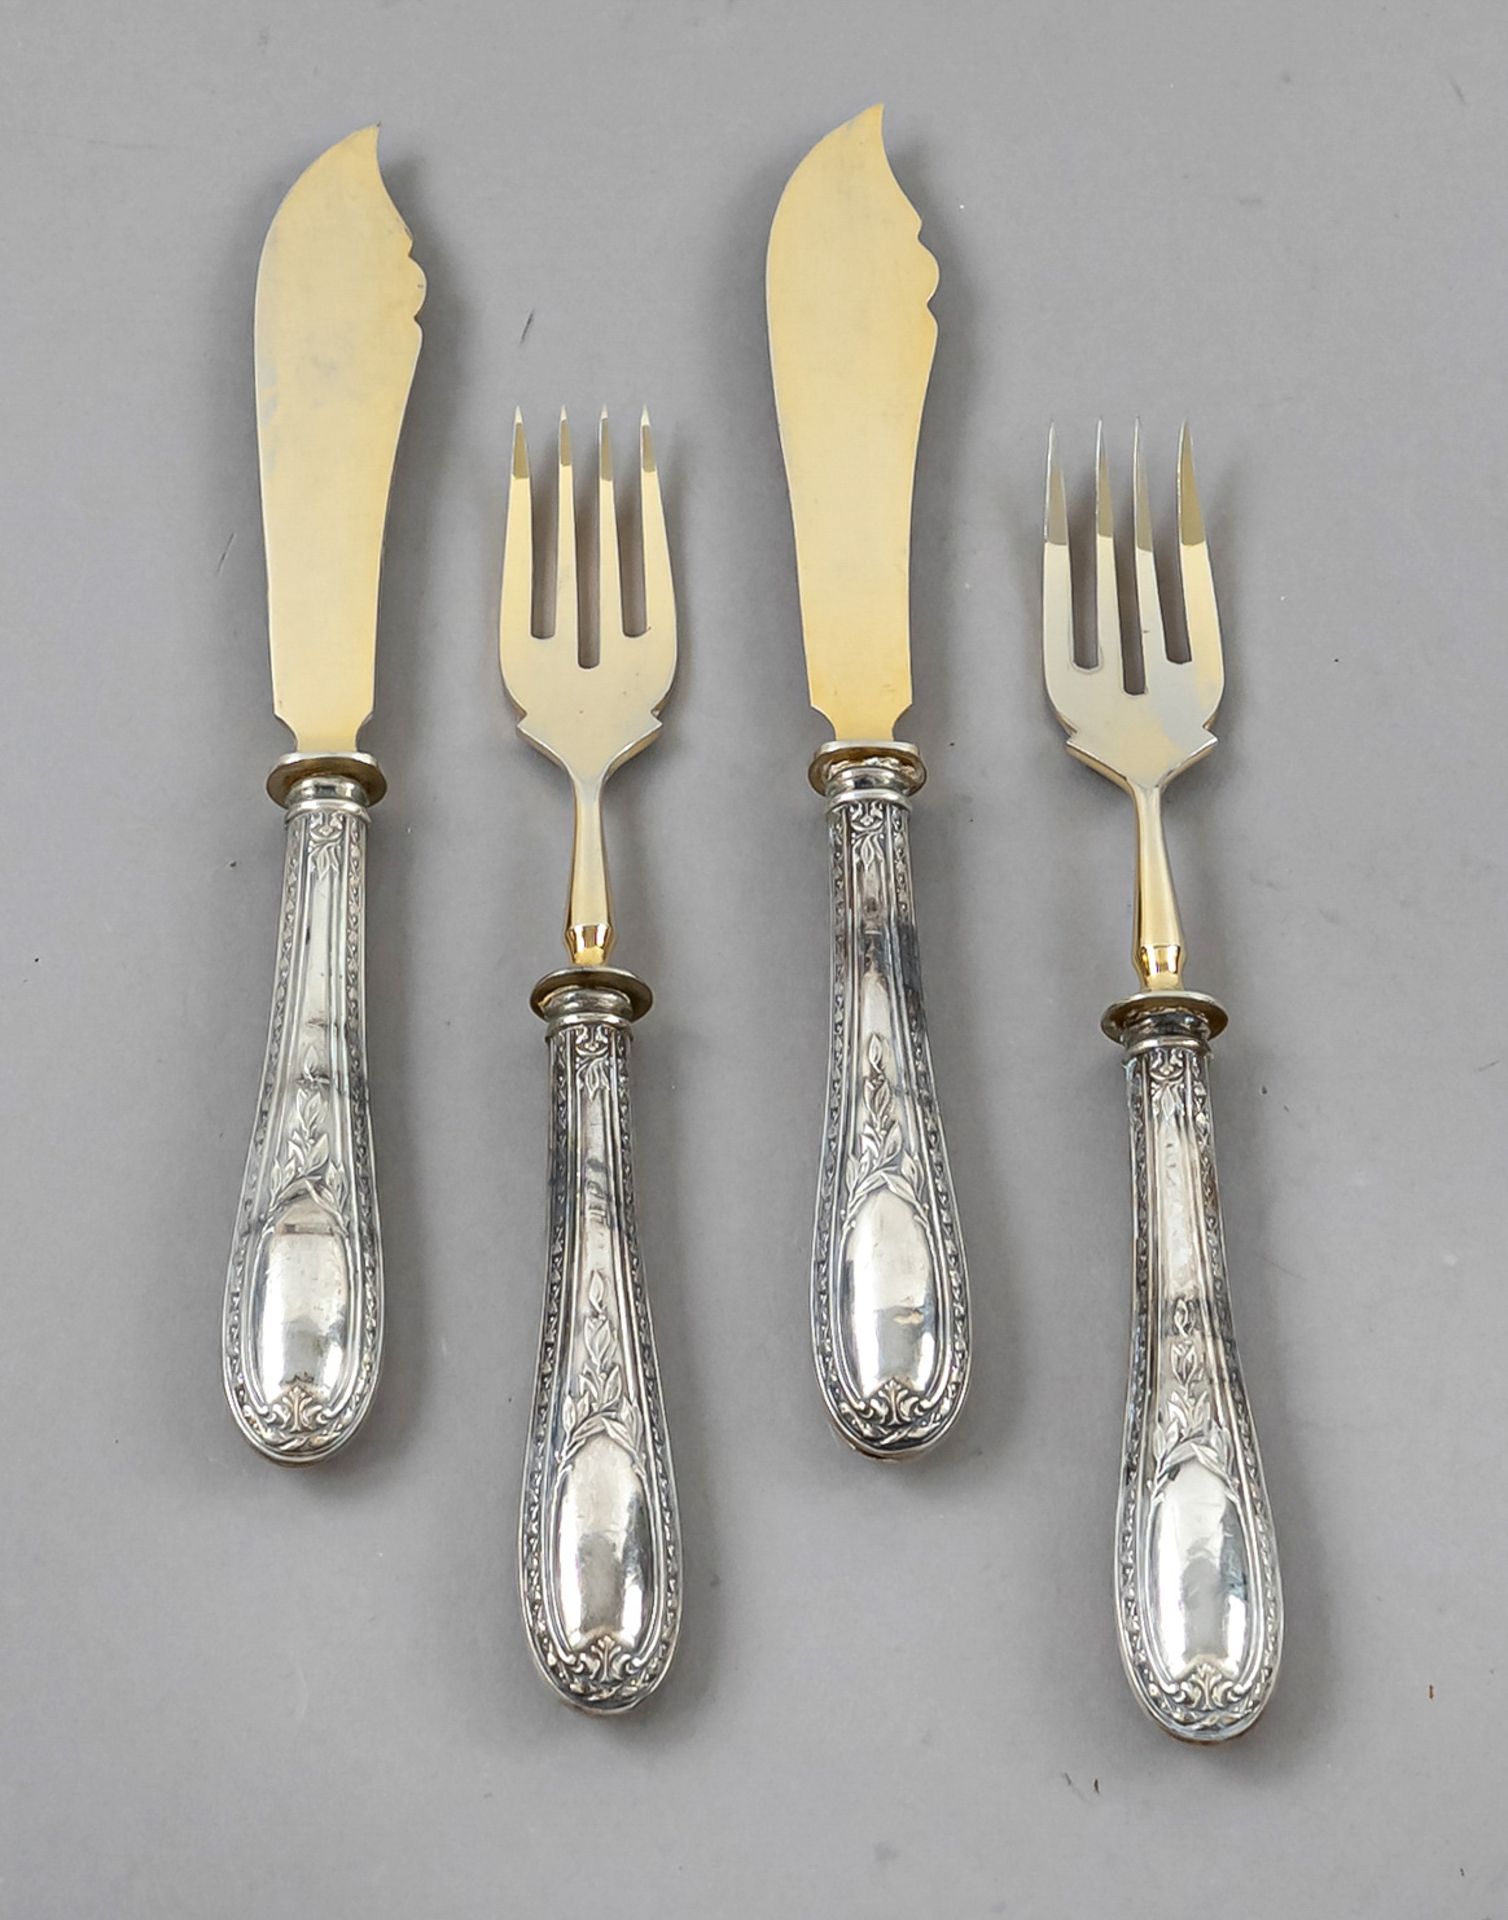 Fish cutlery for six persons, 20th century, silver 800/000, filled handles with floral and